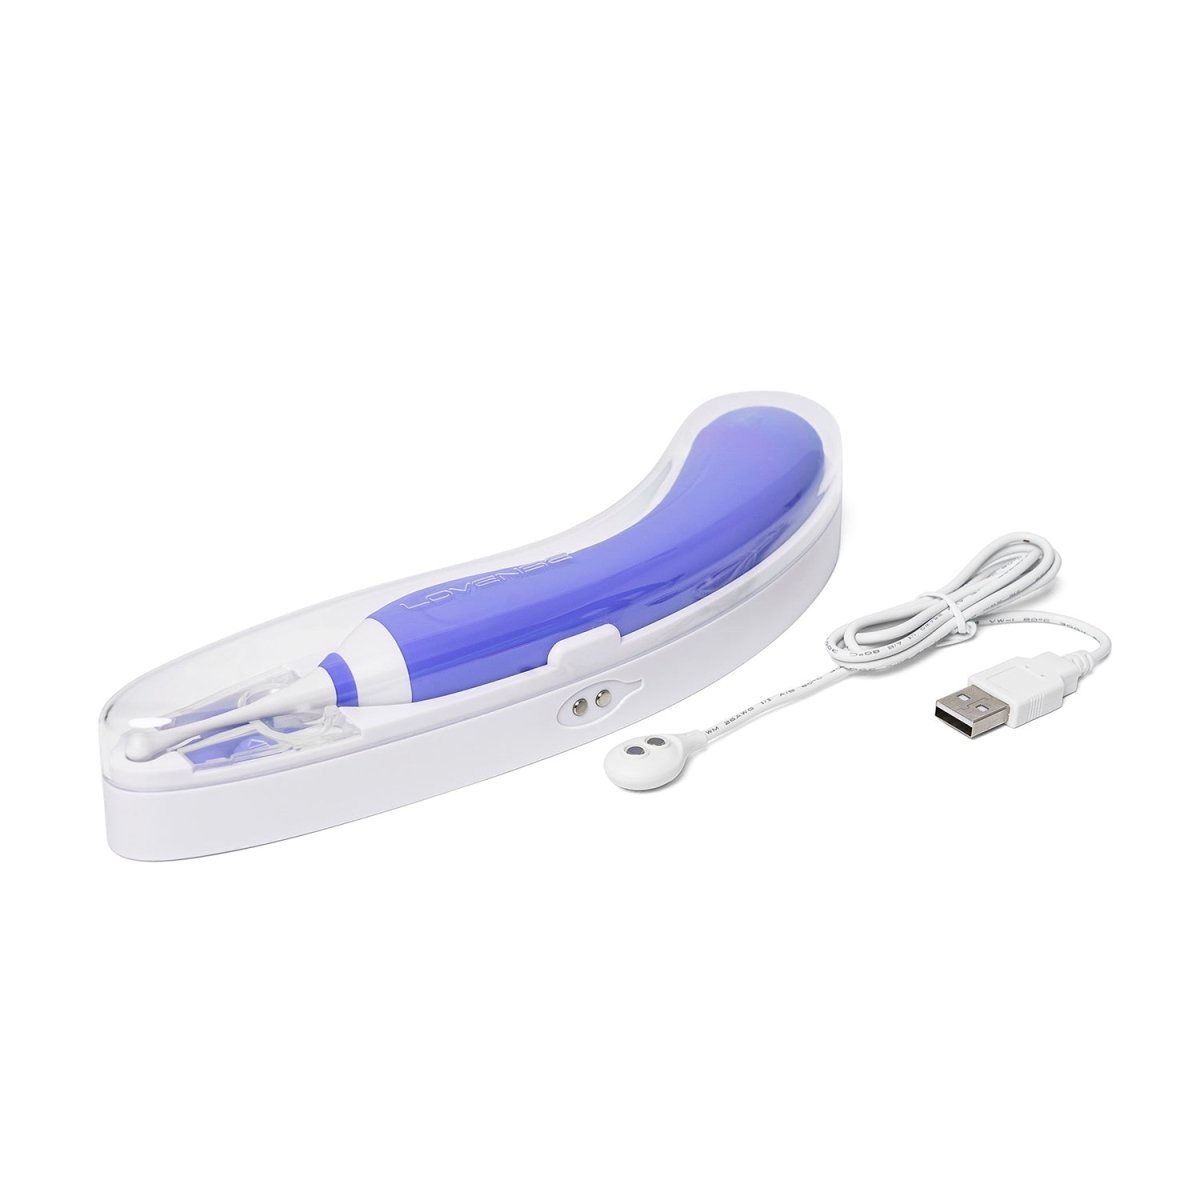 Lovense - Hyphy Remote Control Dual End High Frequency Vibrator - FRISKY BUSINESS SG